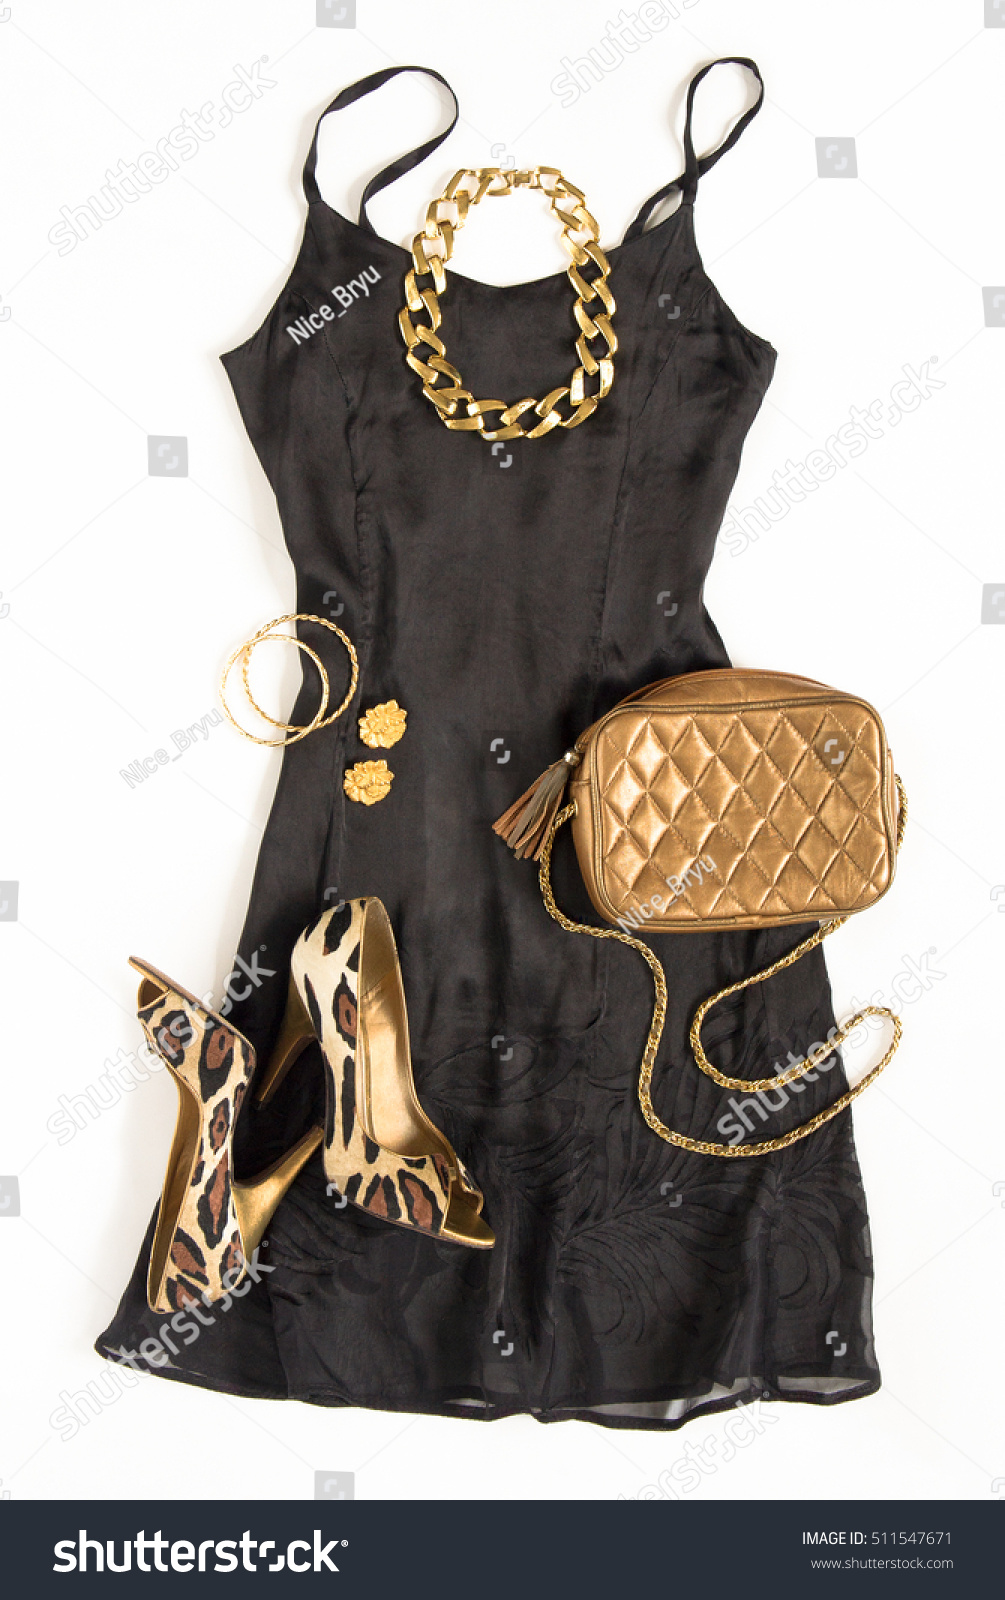 gold and black outfit for party